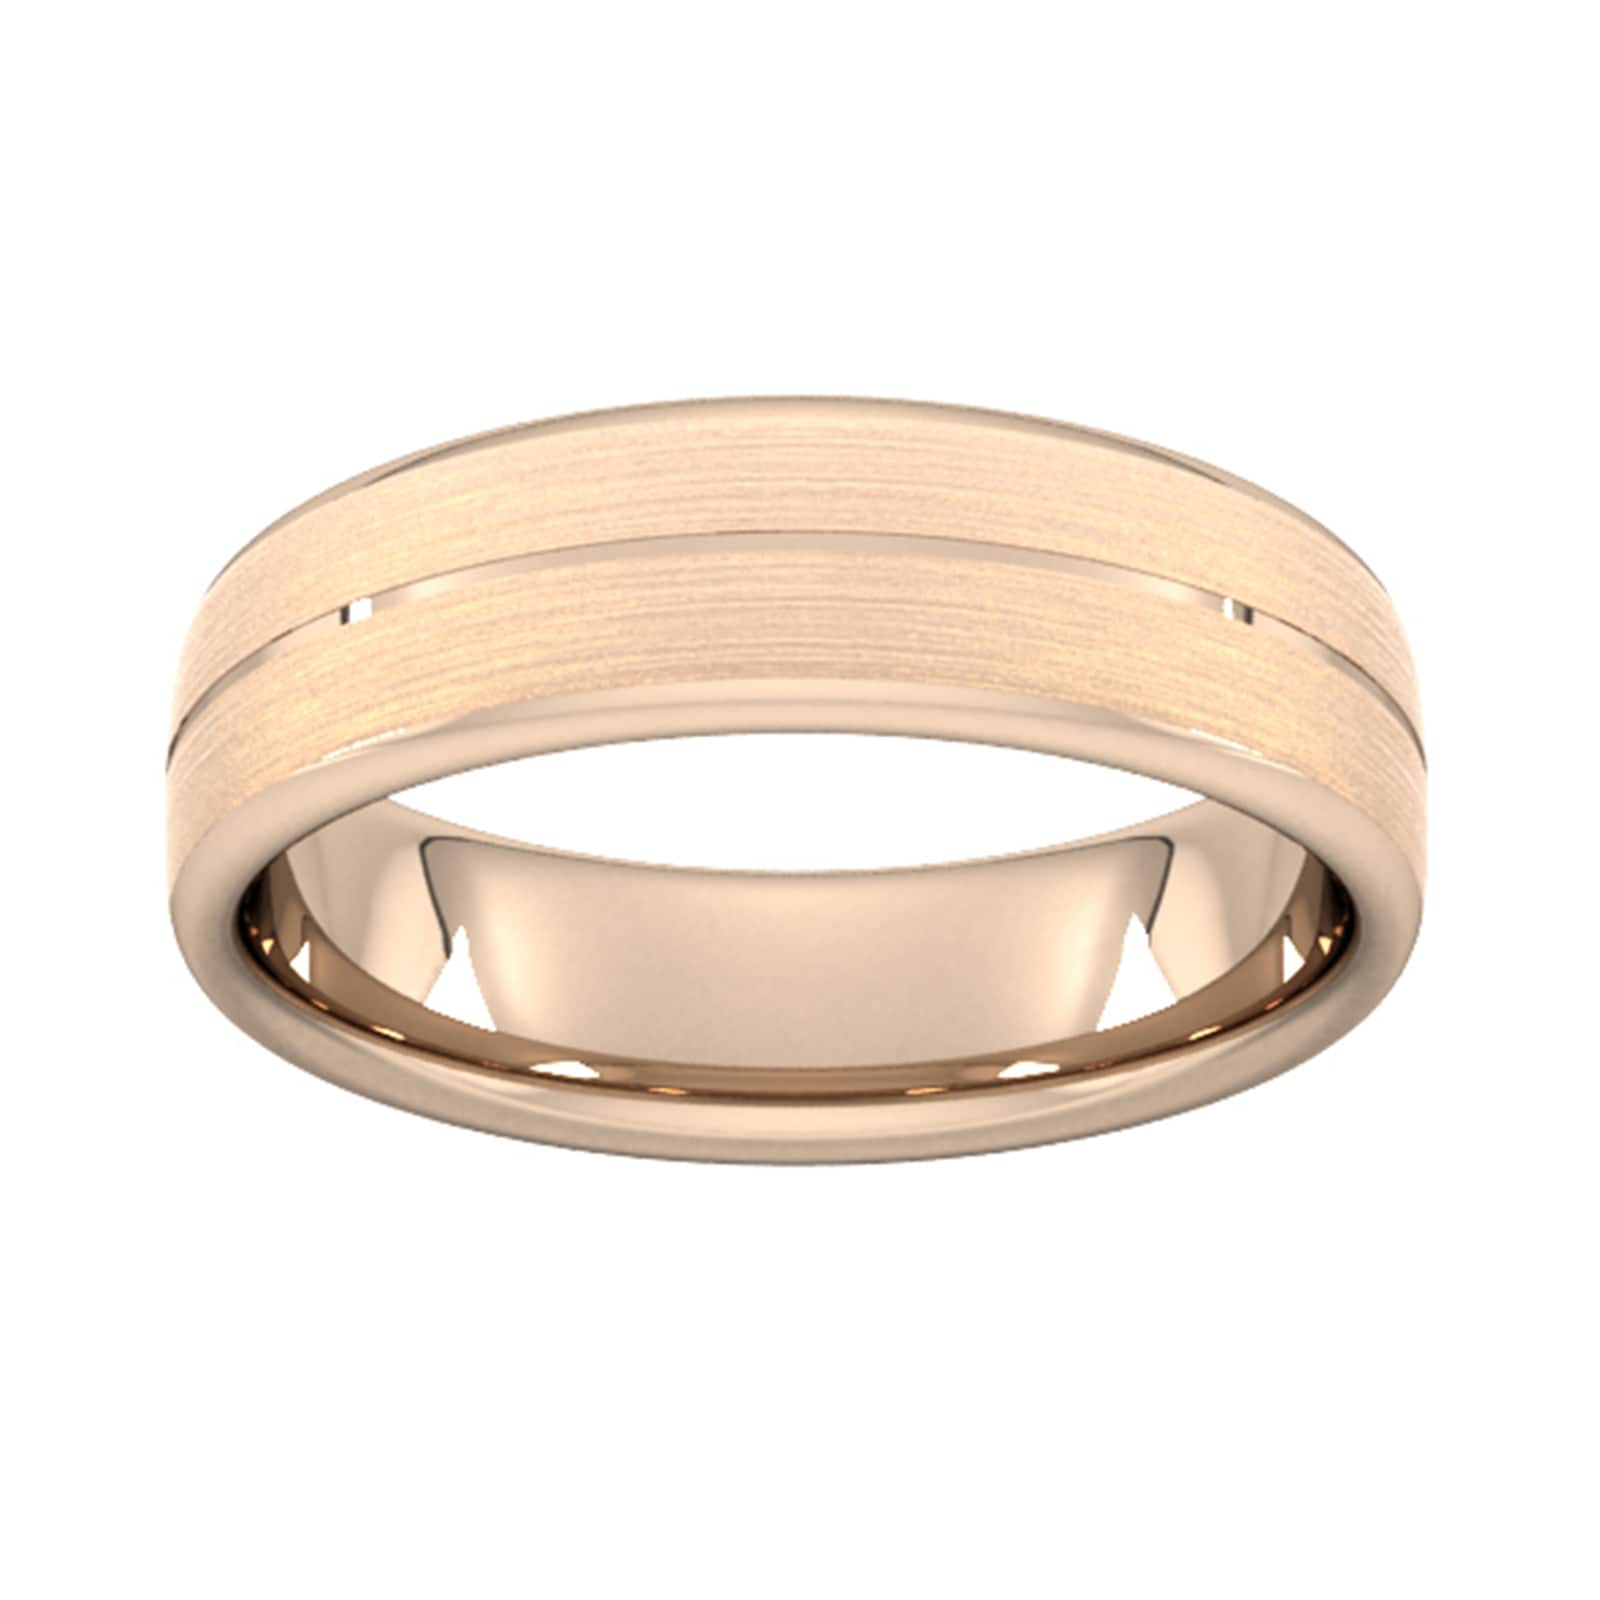 6mm Flat Court Heavy Centre Groove With Chamfered Edge Wedding Ring In 9 Carat Rose Gold - Ring Size R